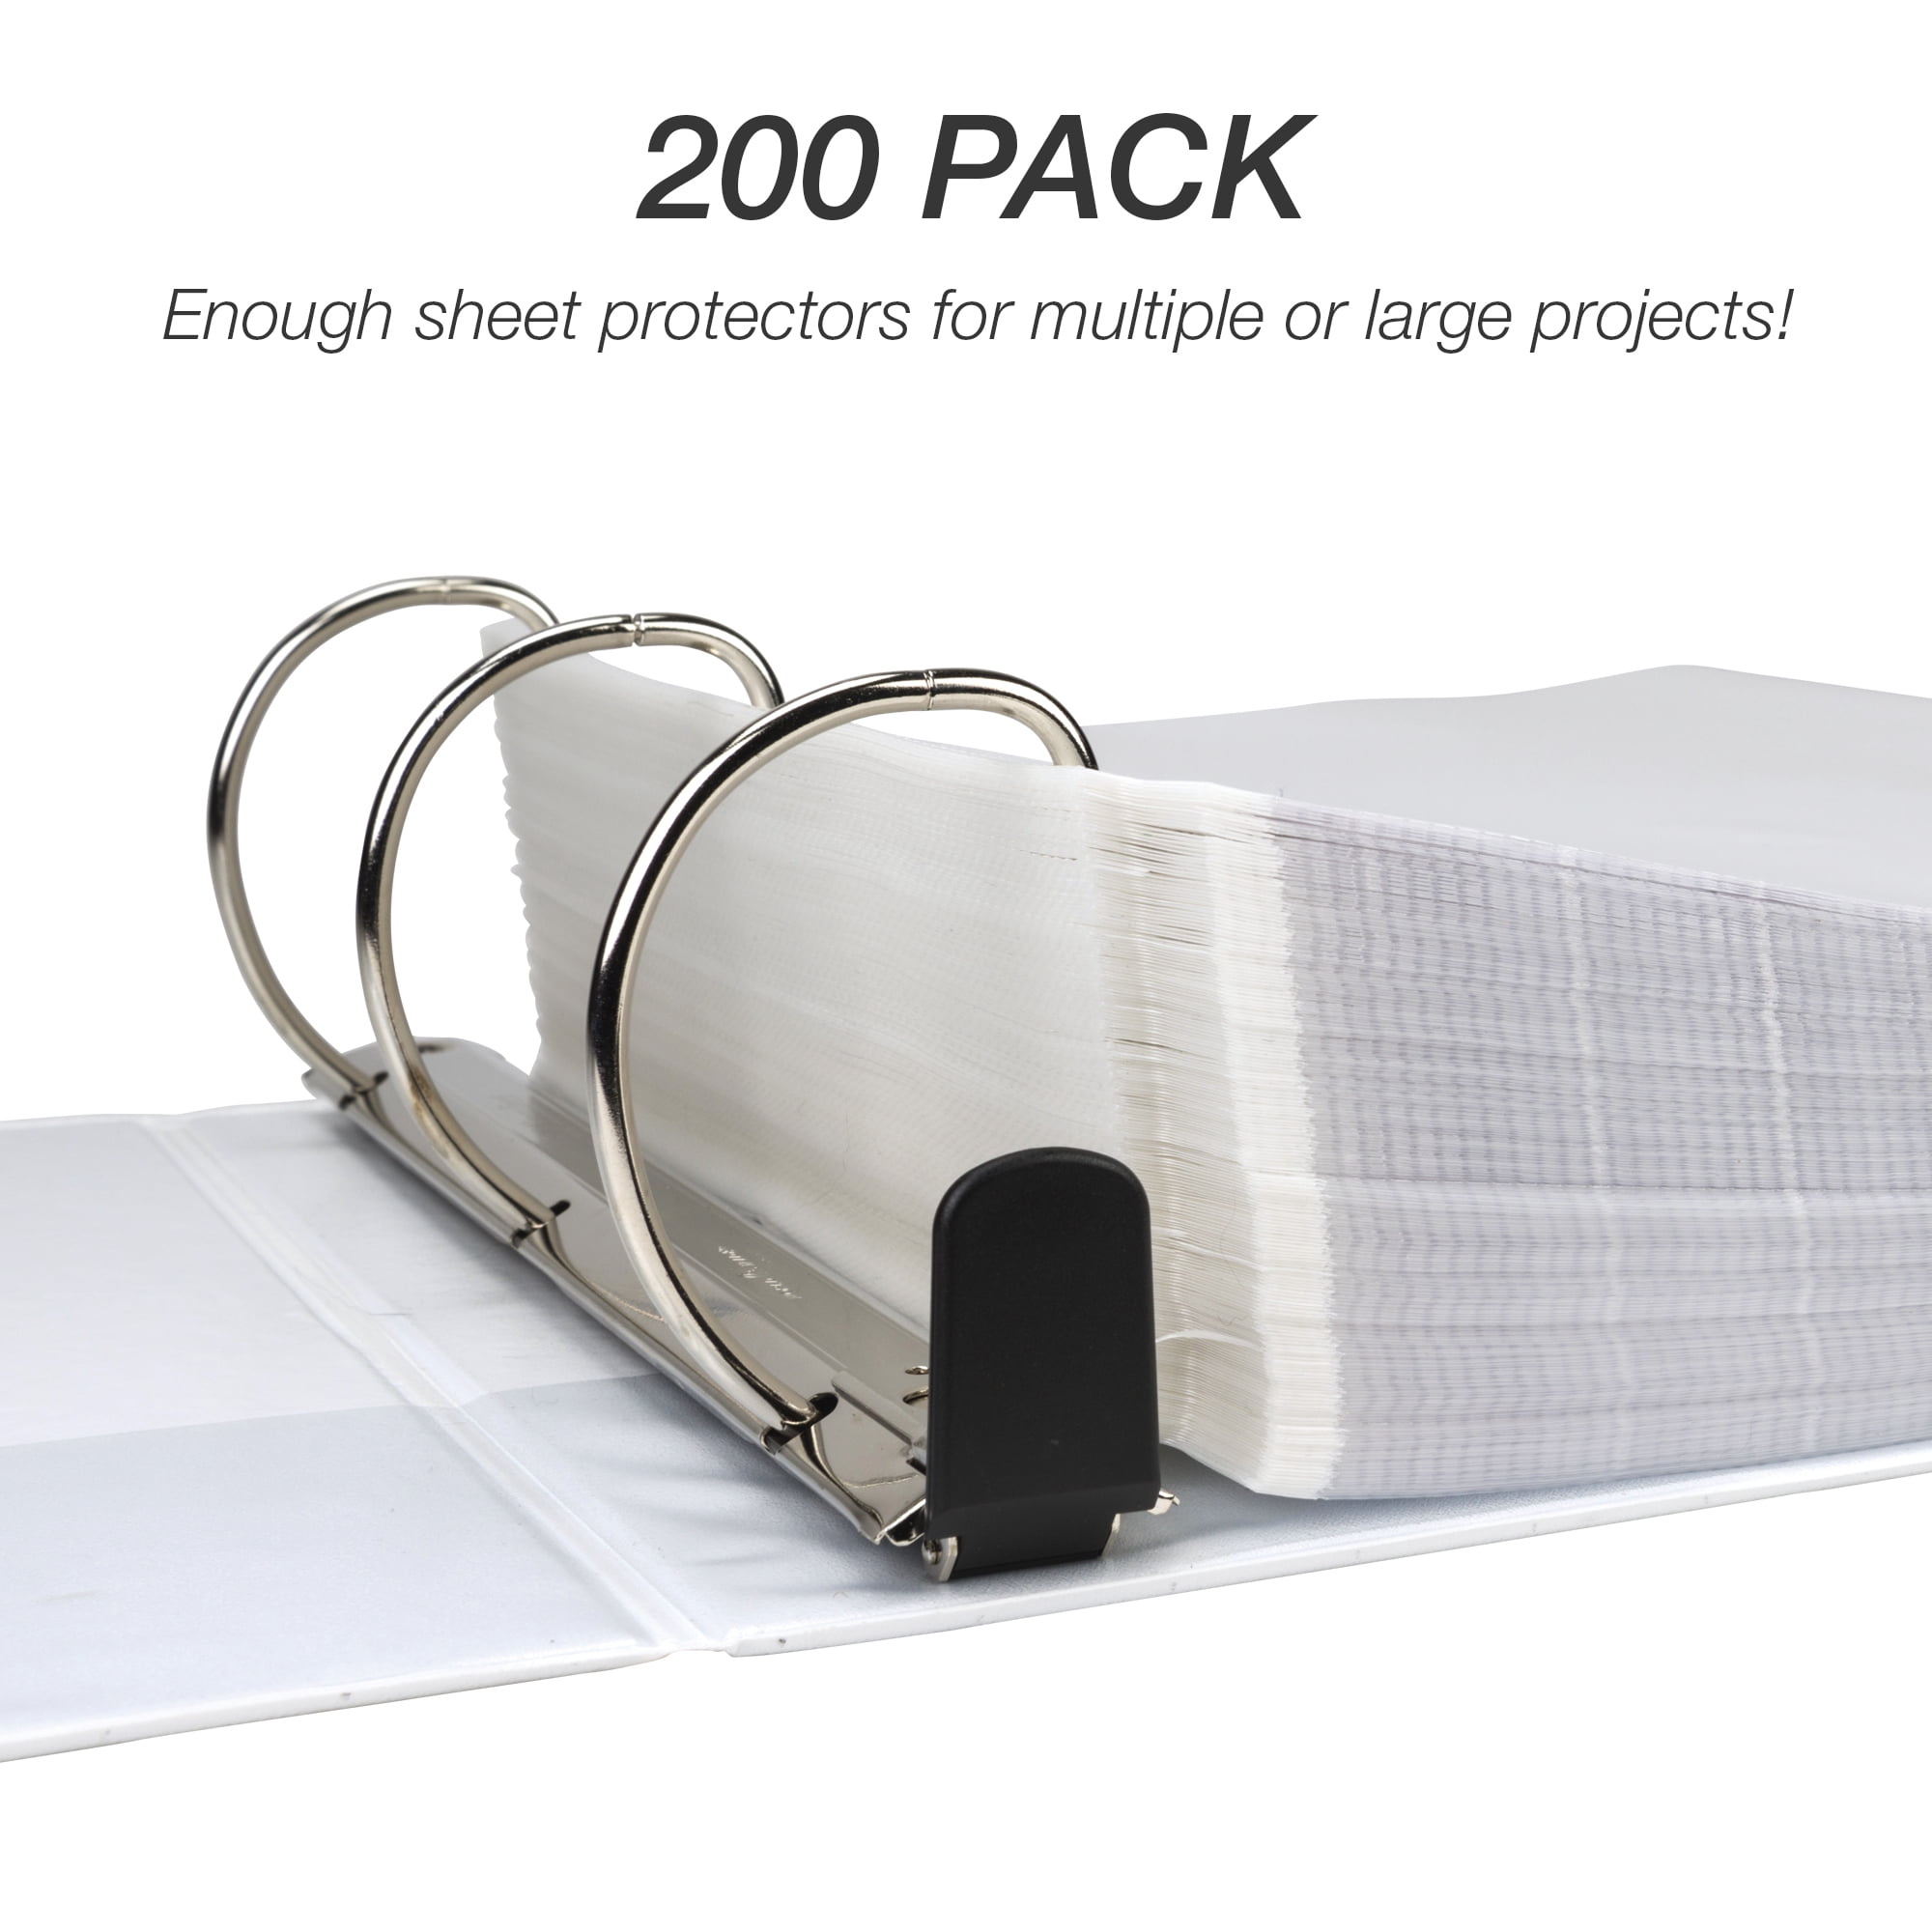 Samsill 30 Pack Legal Size Sheet Protectors Top Load 8.5 x 14 Clear Legal Sheet Protectors 